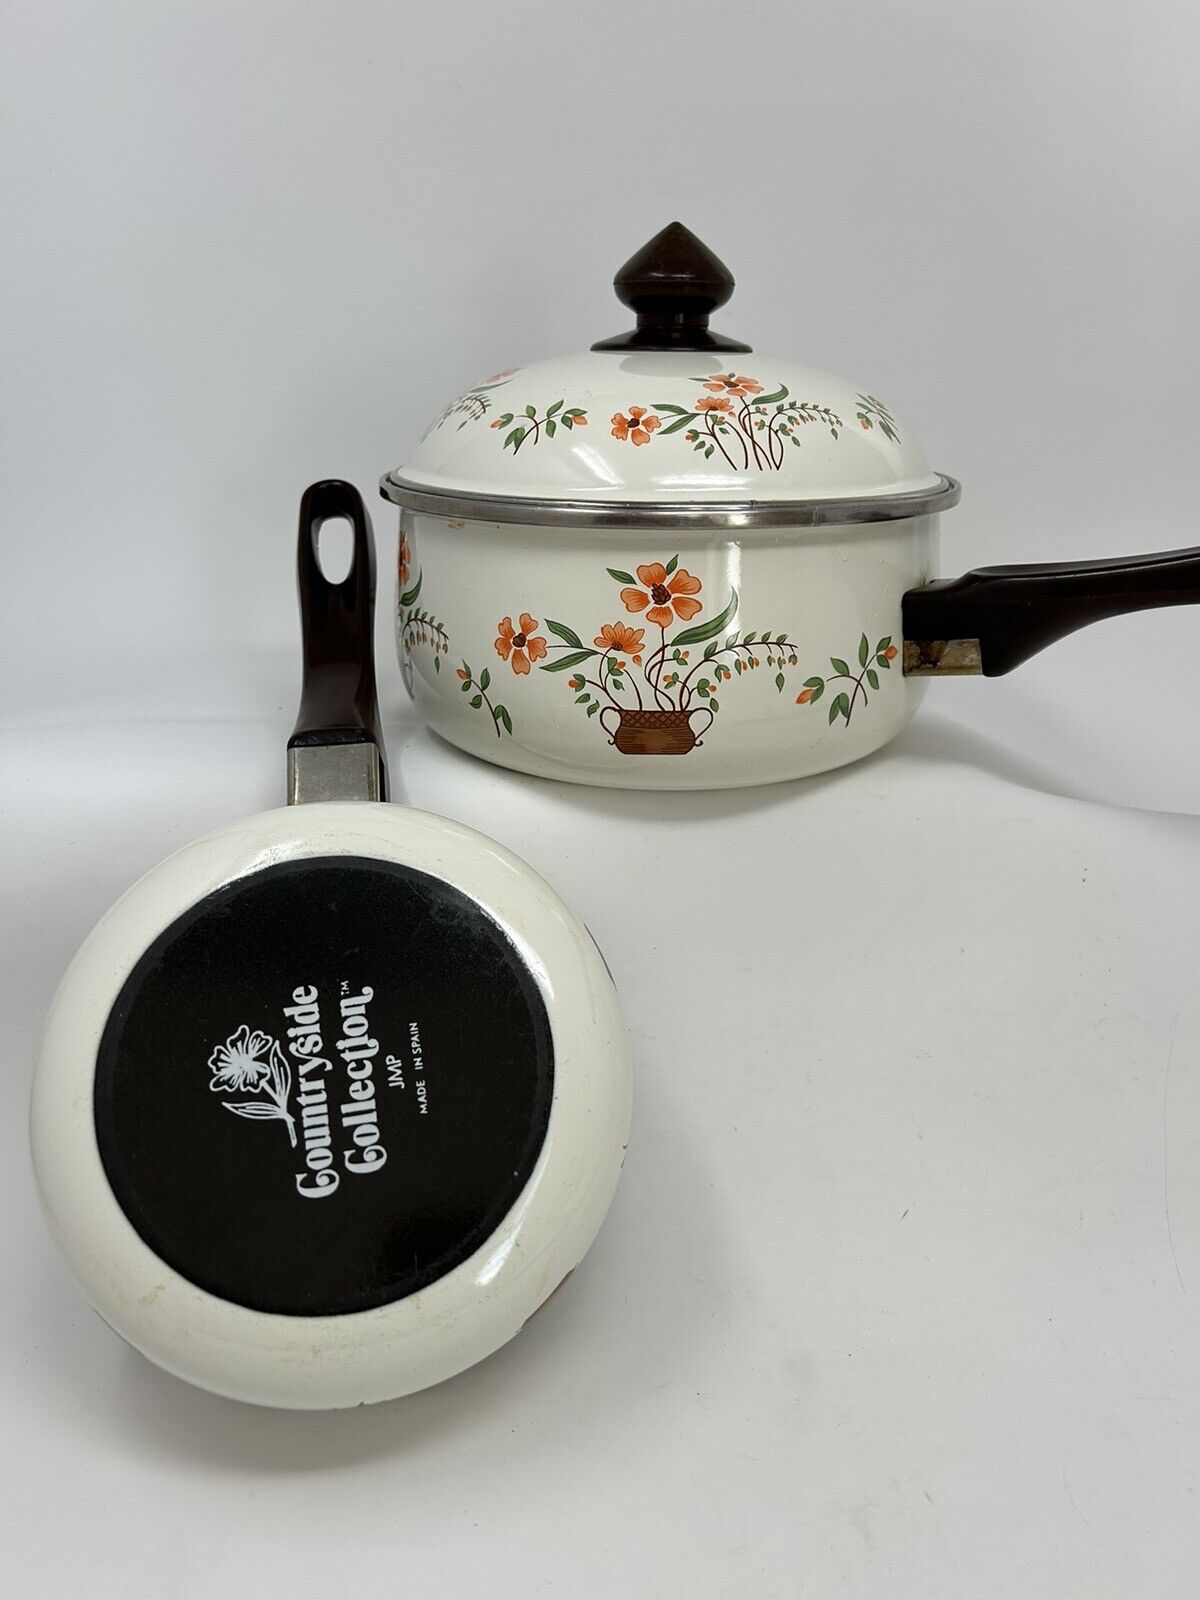 Countryside Collection Enamel Cookware Saucepans Lid by JMP Spain Vintage